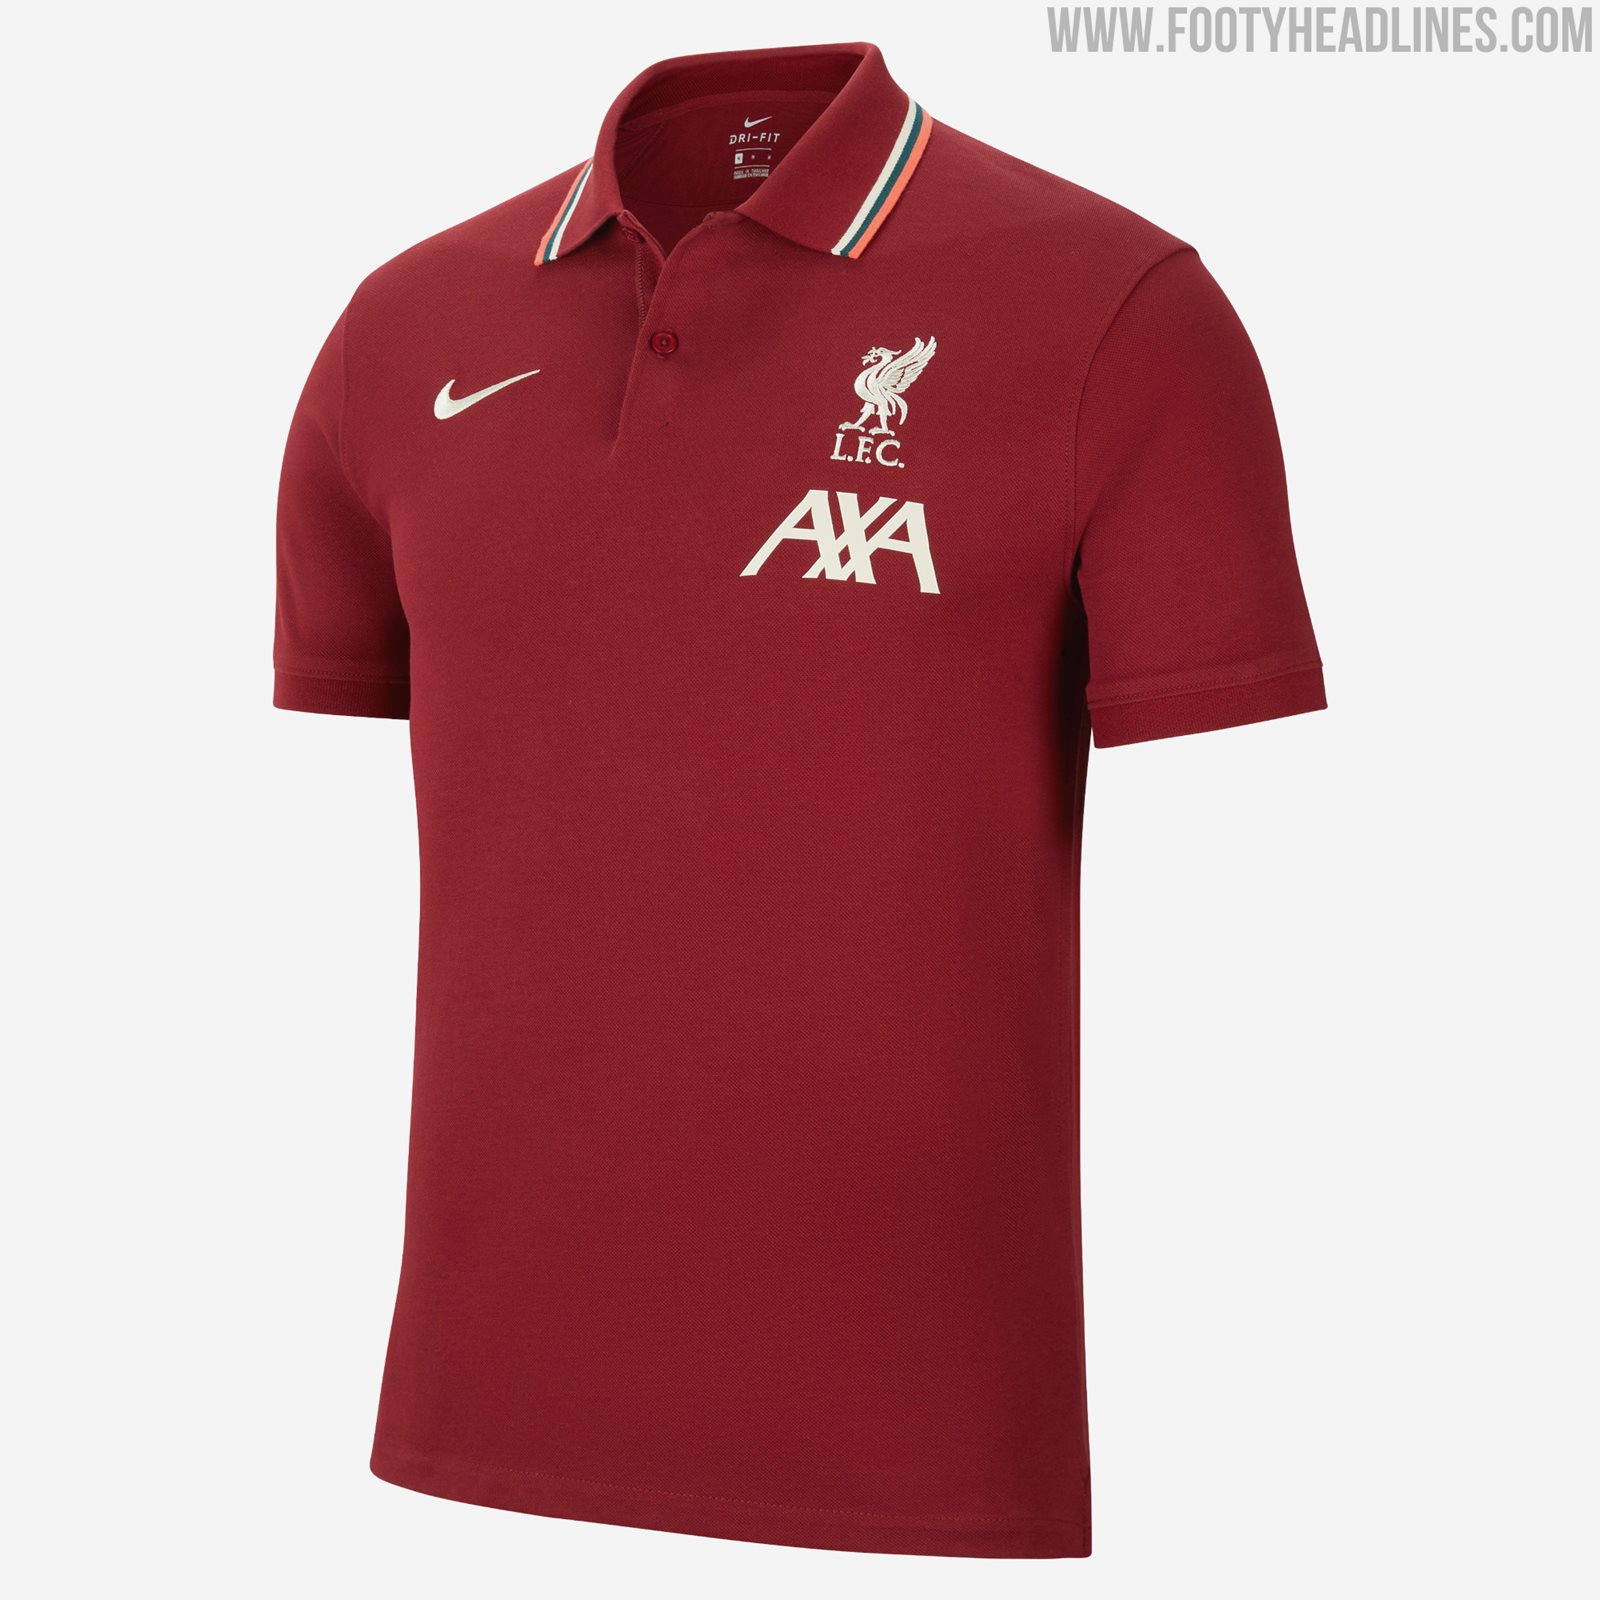 LEAKED: Nike Liverpool 21-22 Kits To Feature Elements Of 96-97 Away Kit